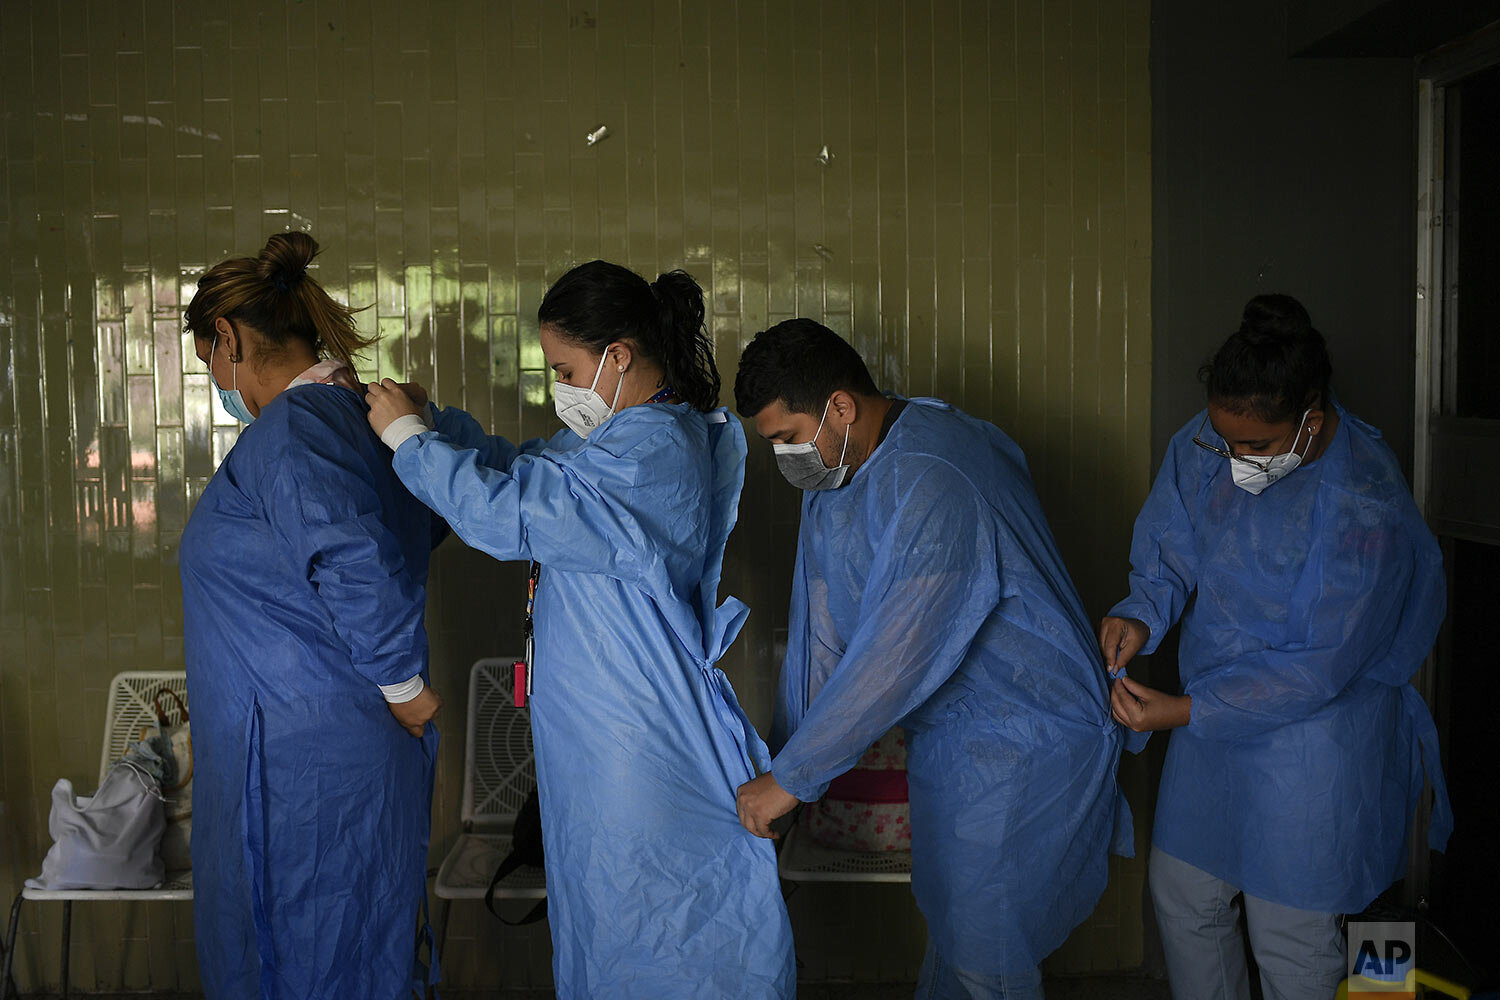  Government doctors put on protective gowns as they prepare to give free, rapid COVID-19 tests to volunteers in the El Paraiso neighborhood of Caracas, Venezuela, Jan. 14, 2021. (AP Photo/Matias Delacroix) 